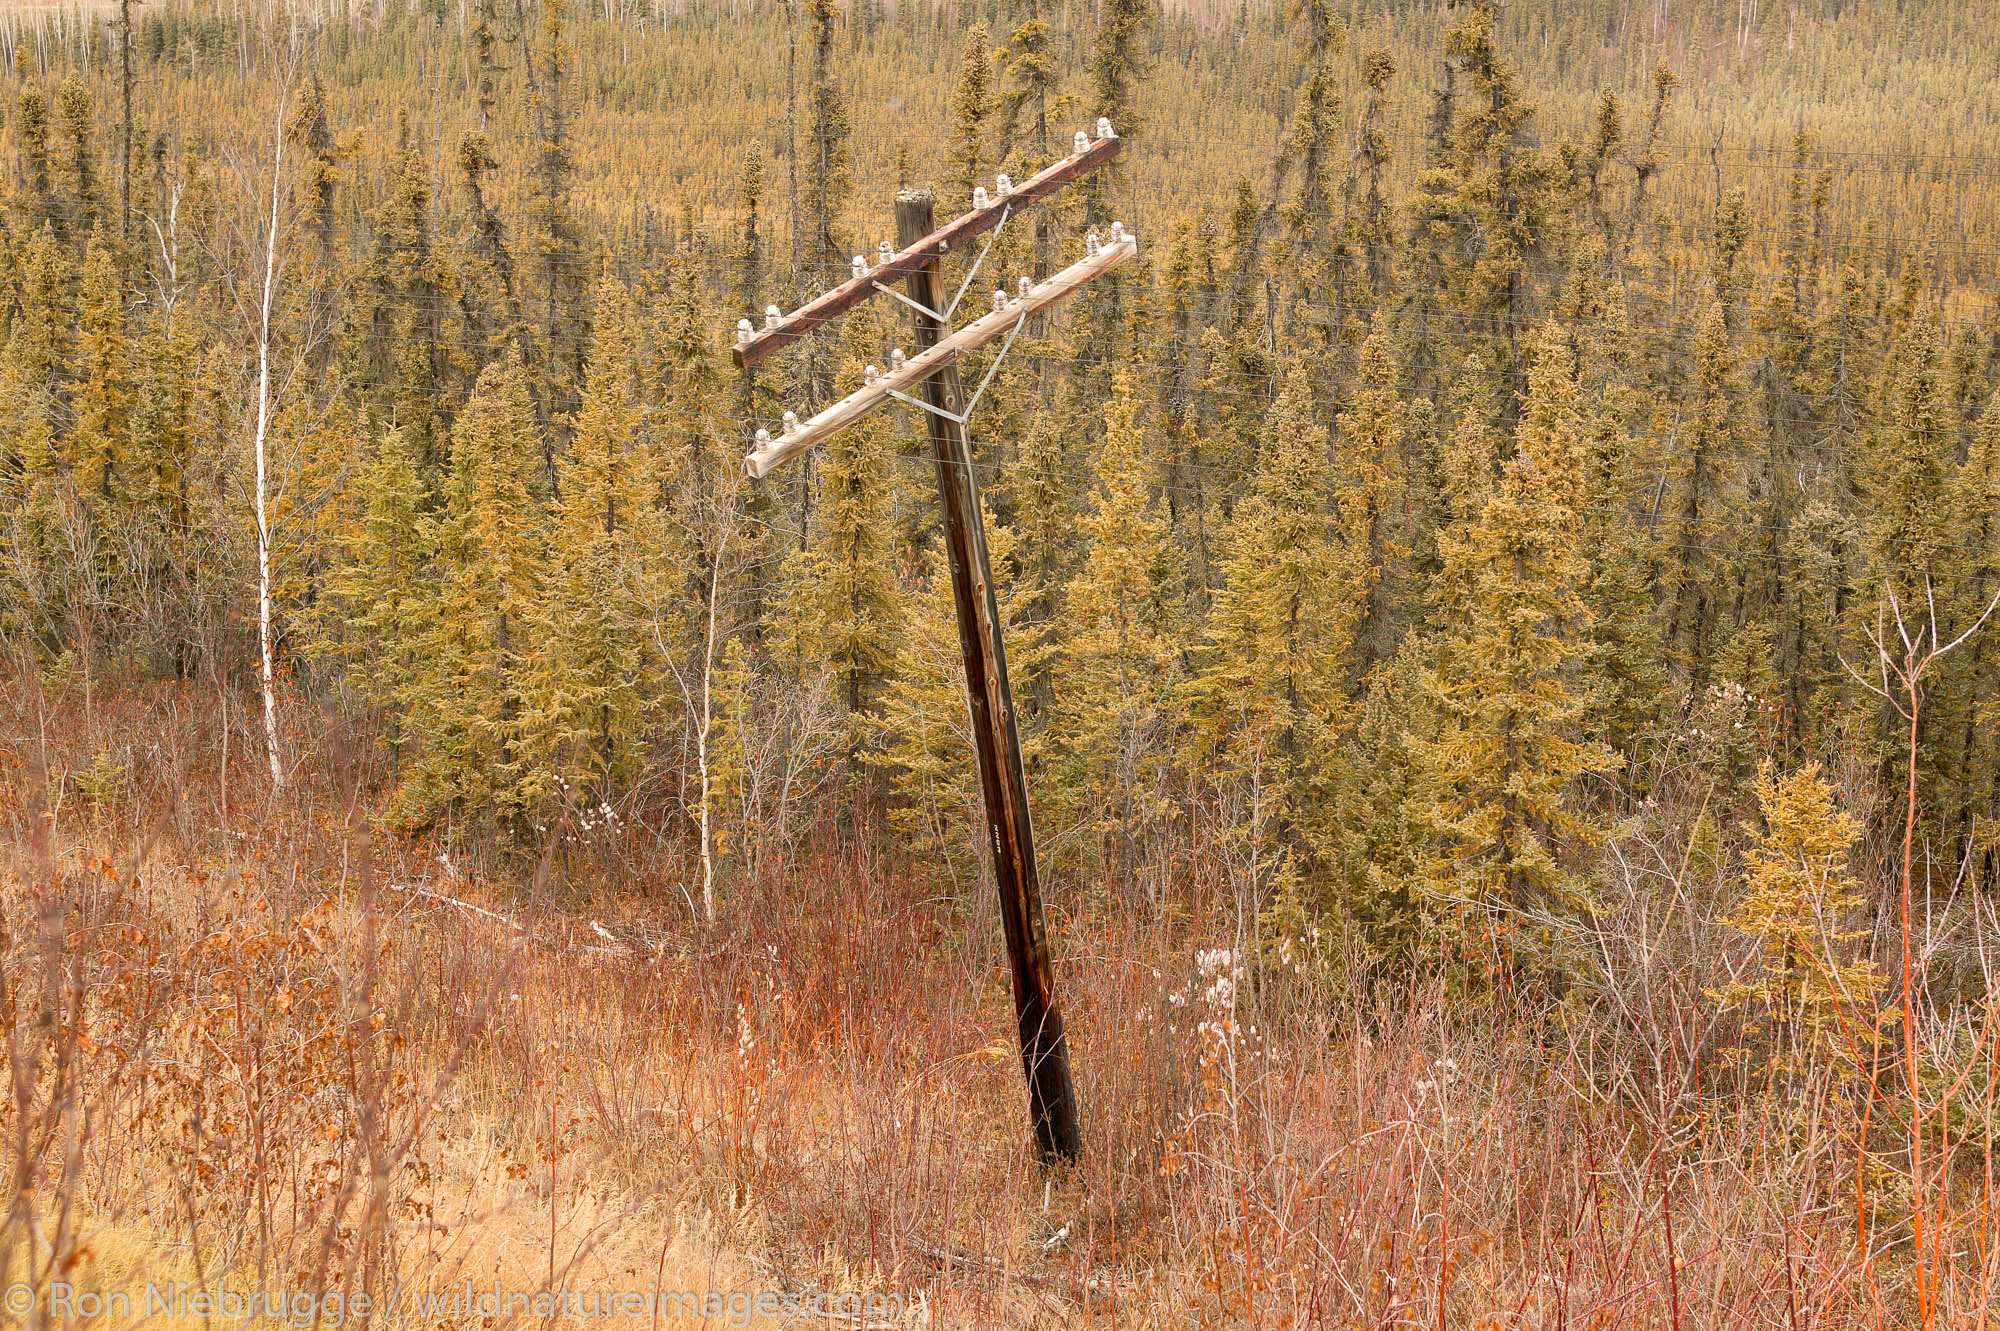 Powerlines leaning due to the thawing tundra, Alaska.